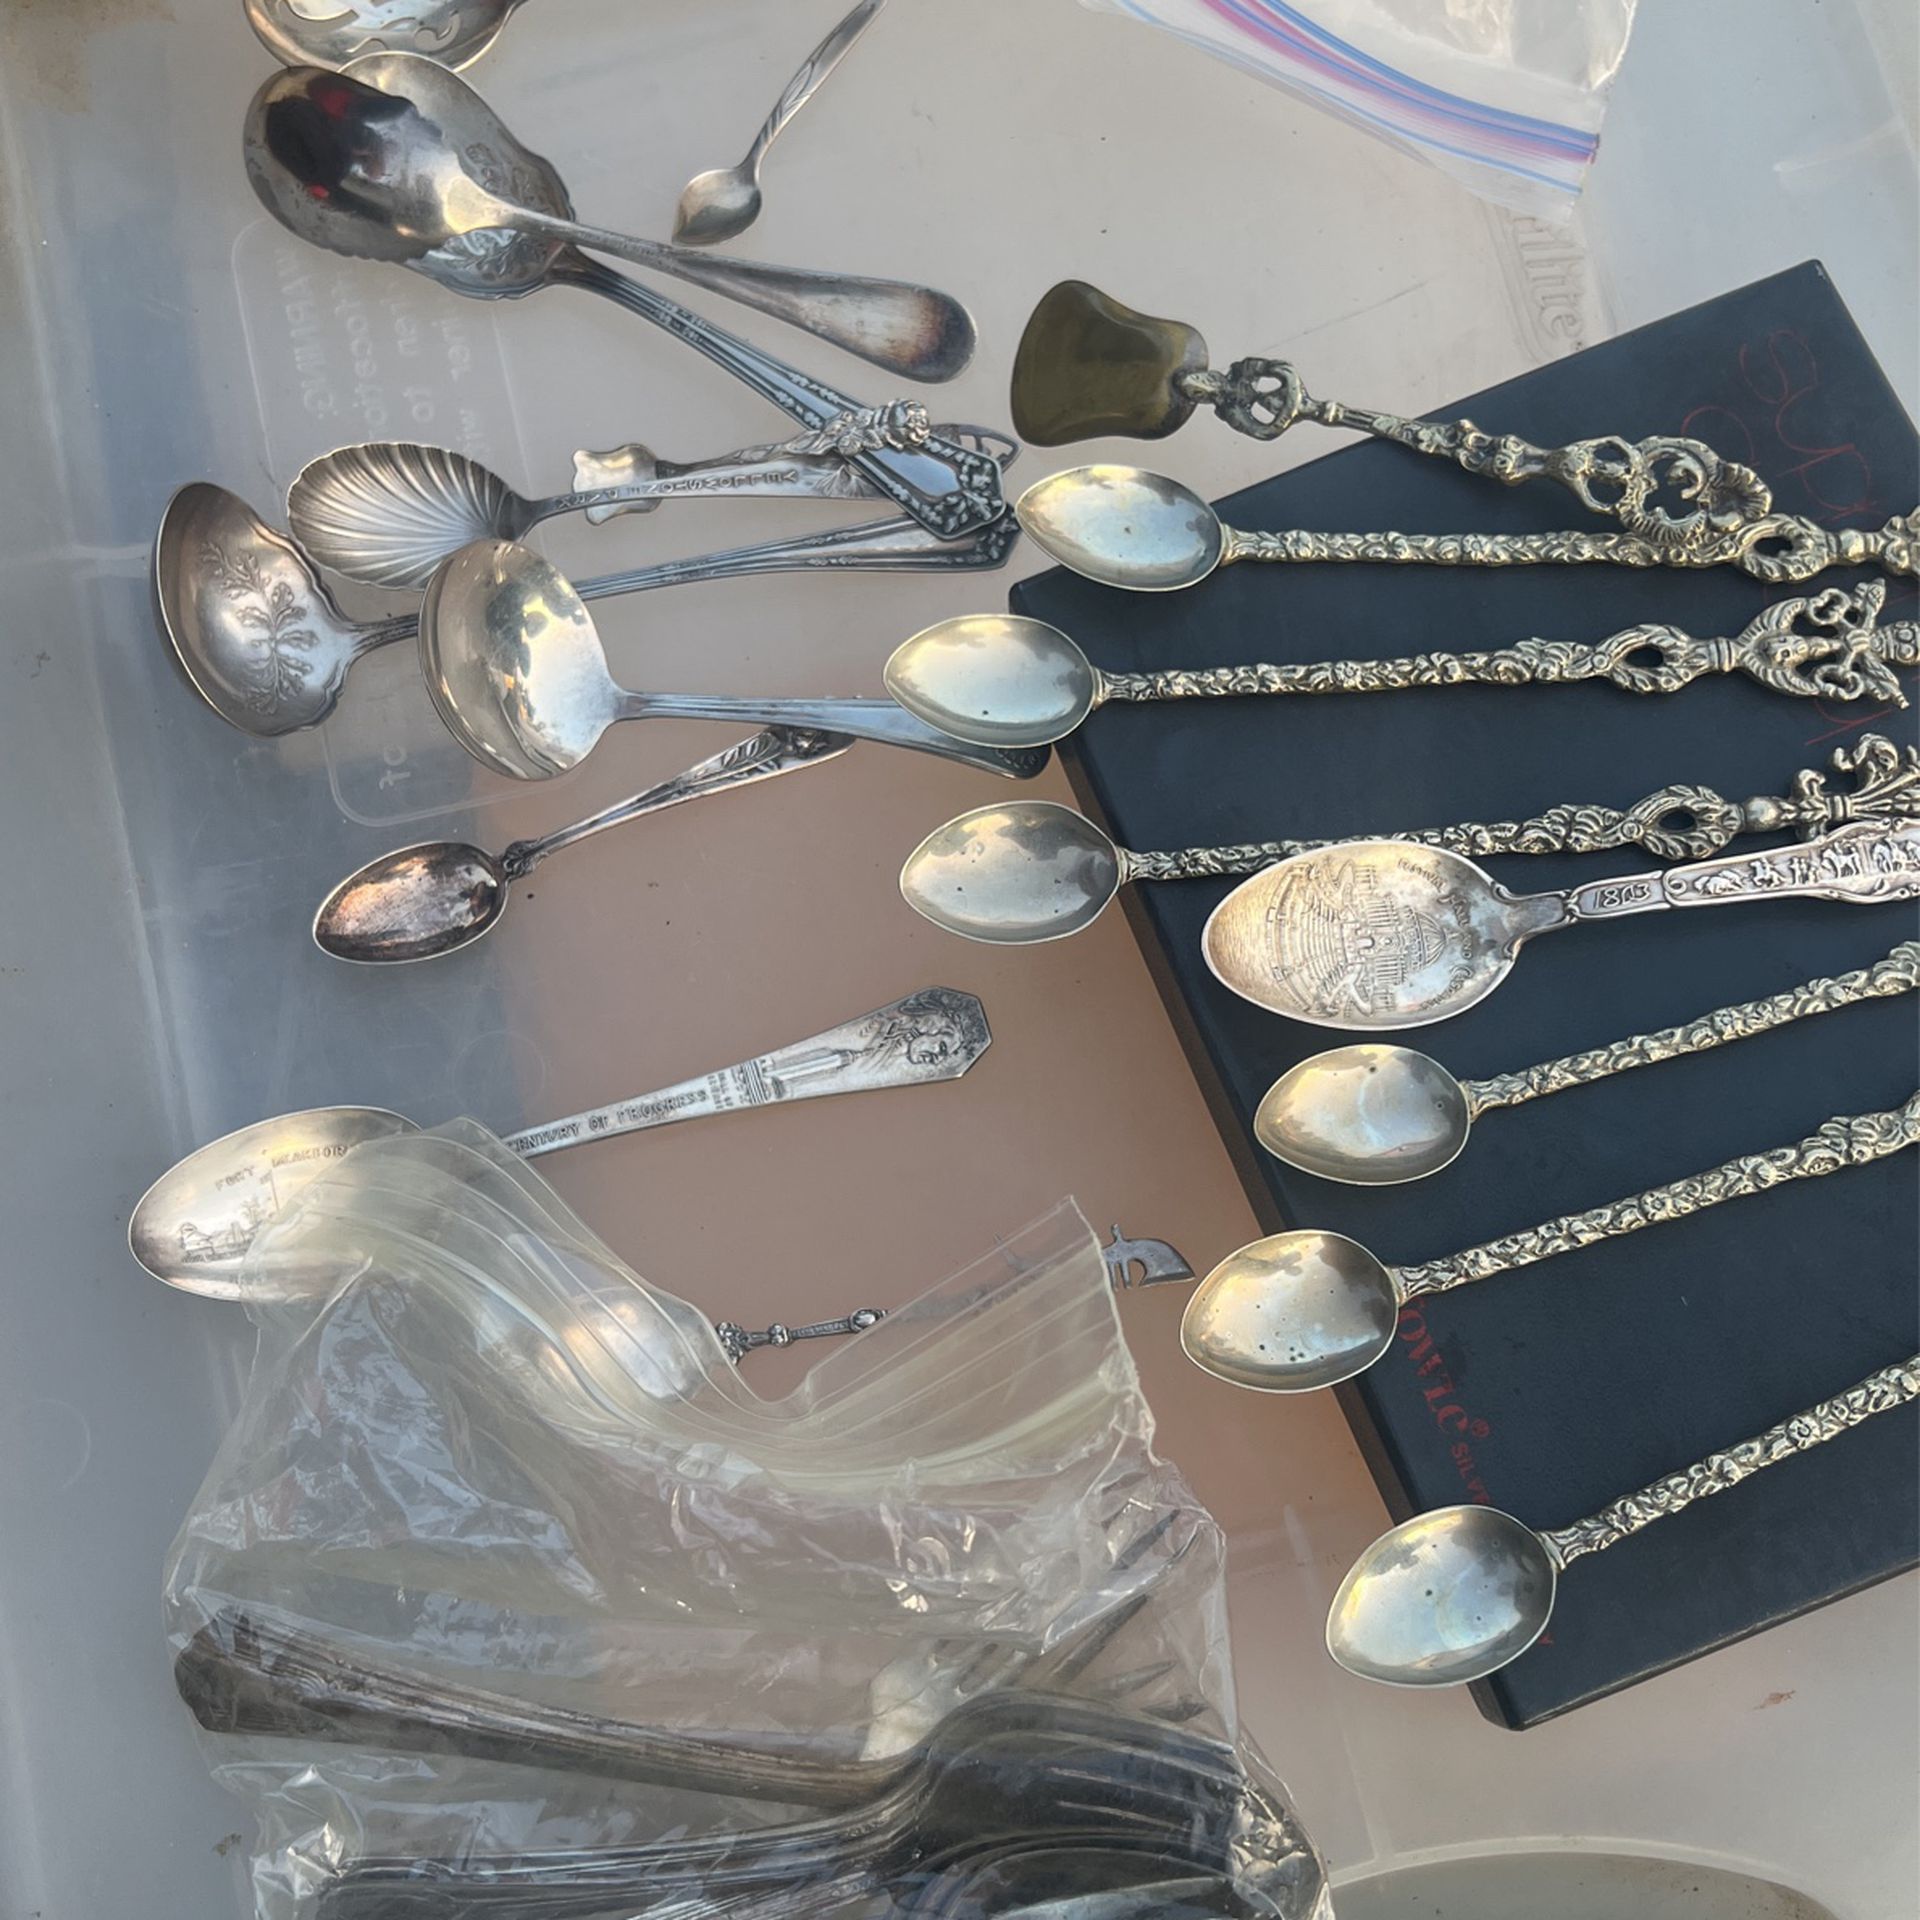 Antique Spoons/Silver/ Silver Plated Spoons/ Make An Offer